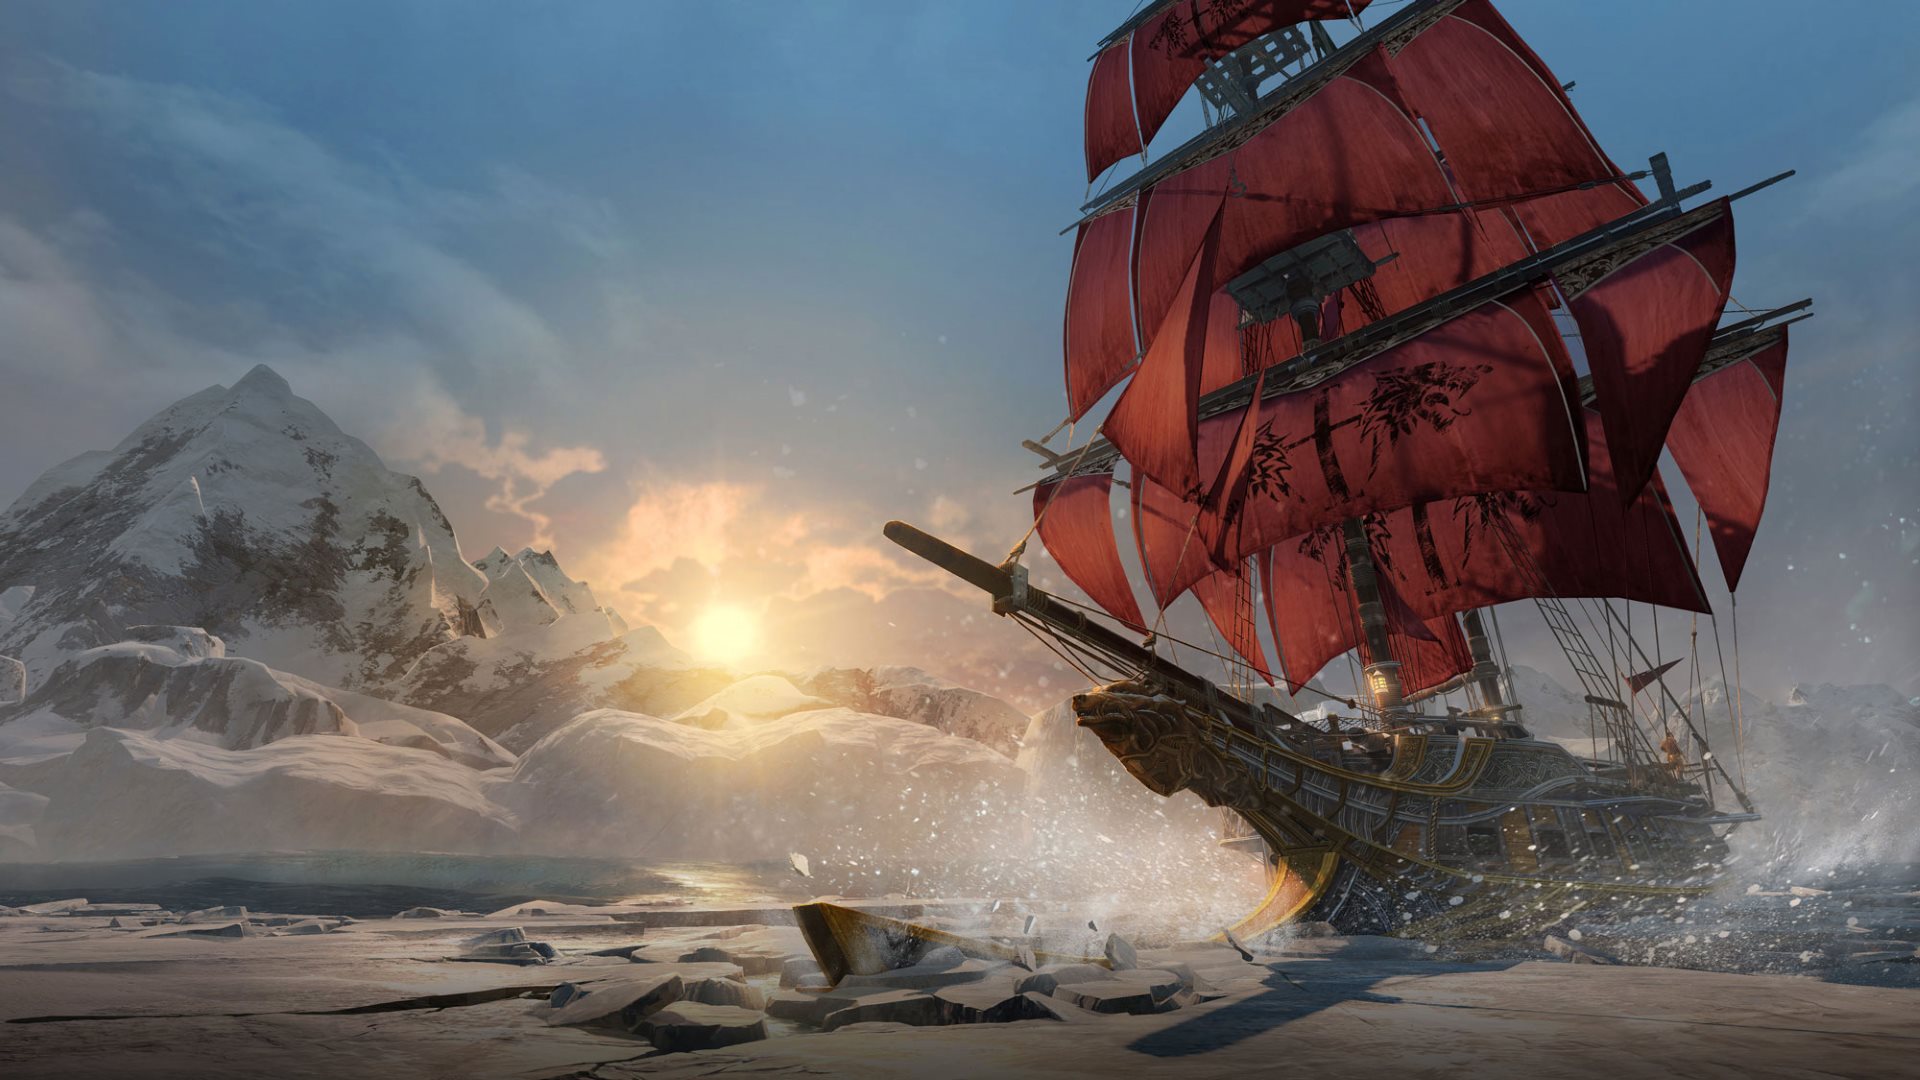 Assassin's Creed: Rogue system requirements and release date revealed